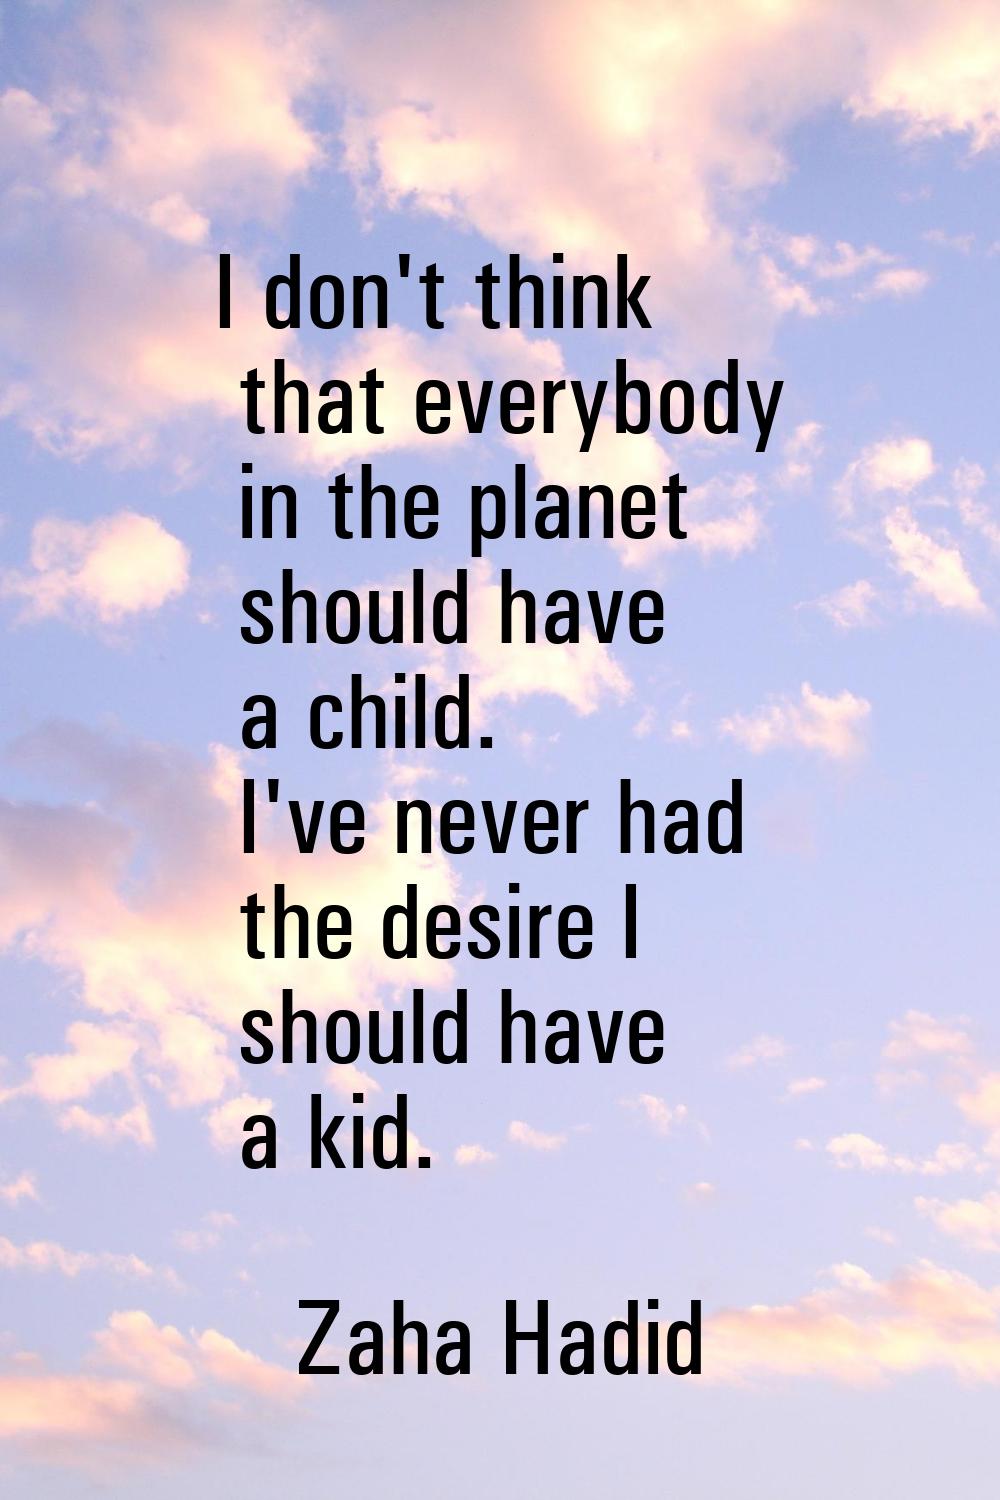 I don't think that everybody in the planet should have a child. I've never had the desire I should 